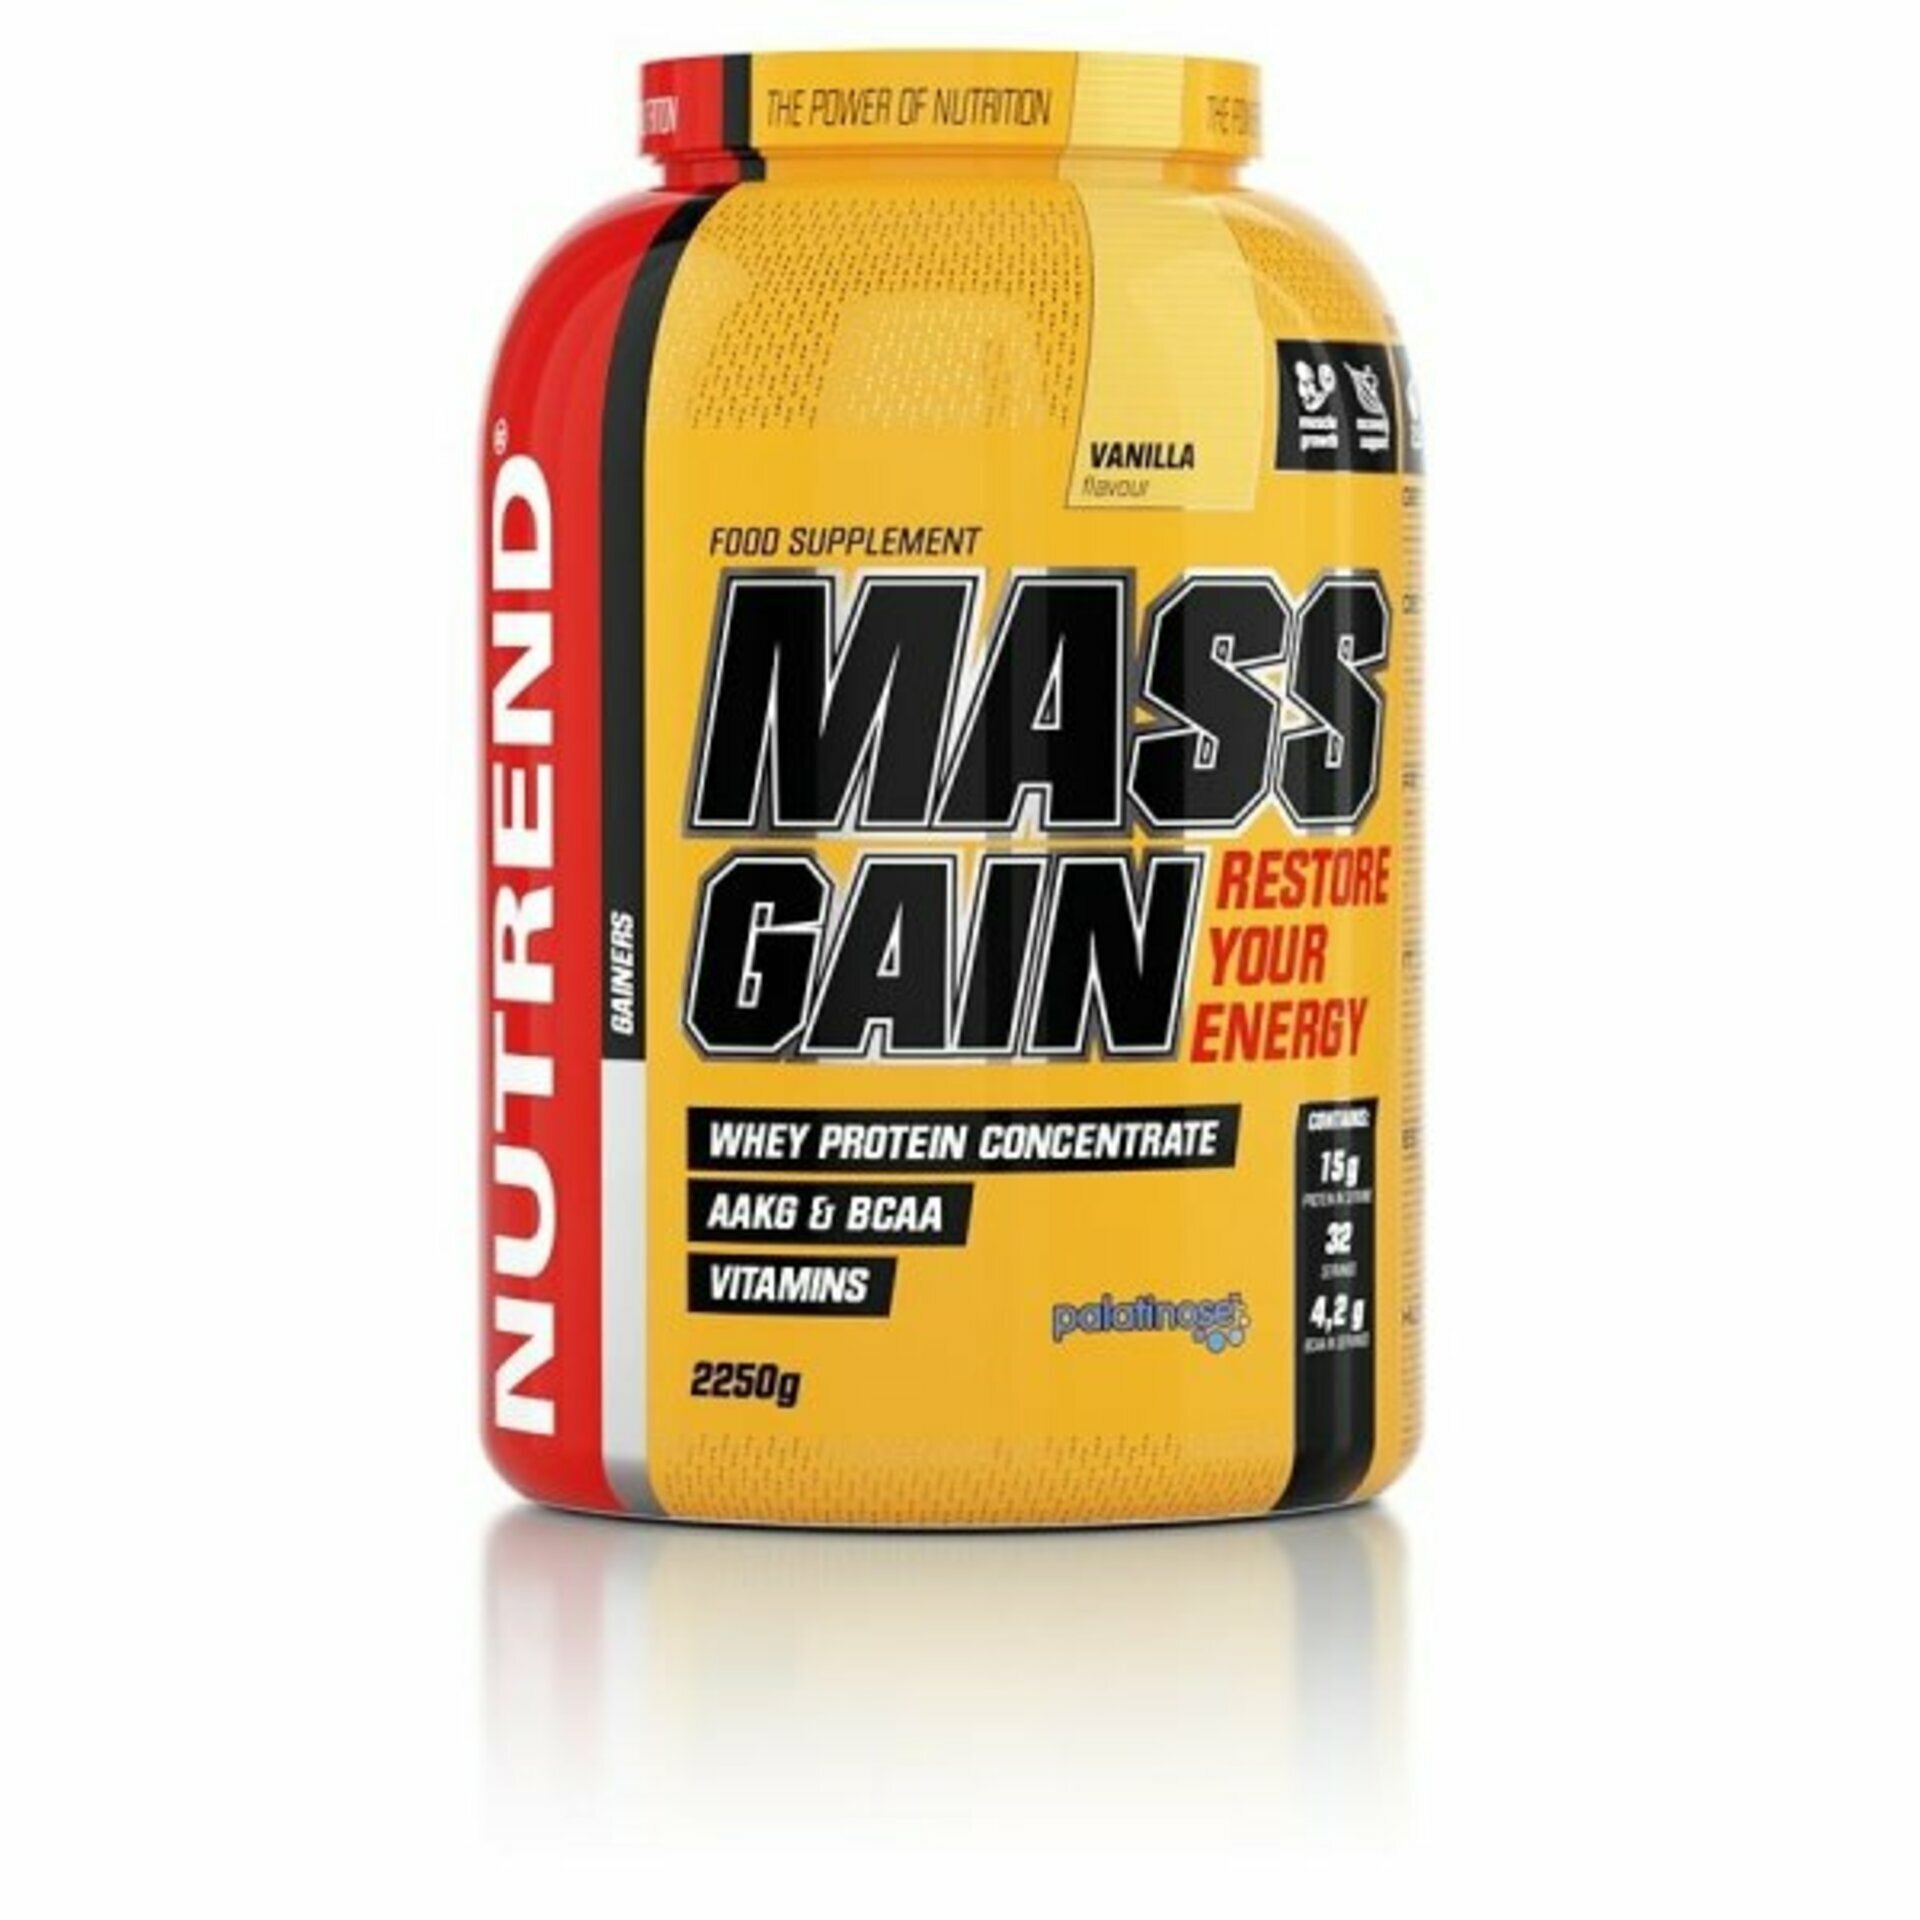 Nutrend Mass Gain 2250 g - biscuit expirace